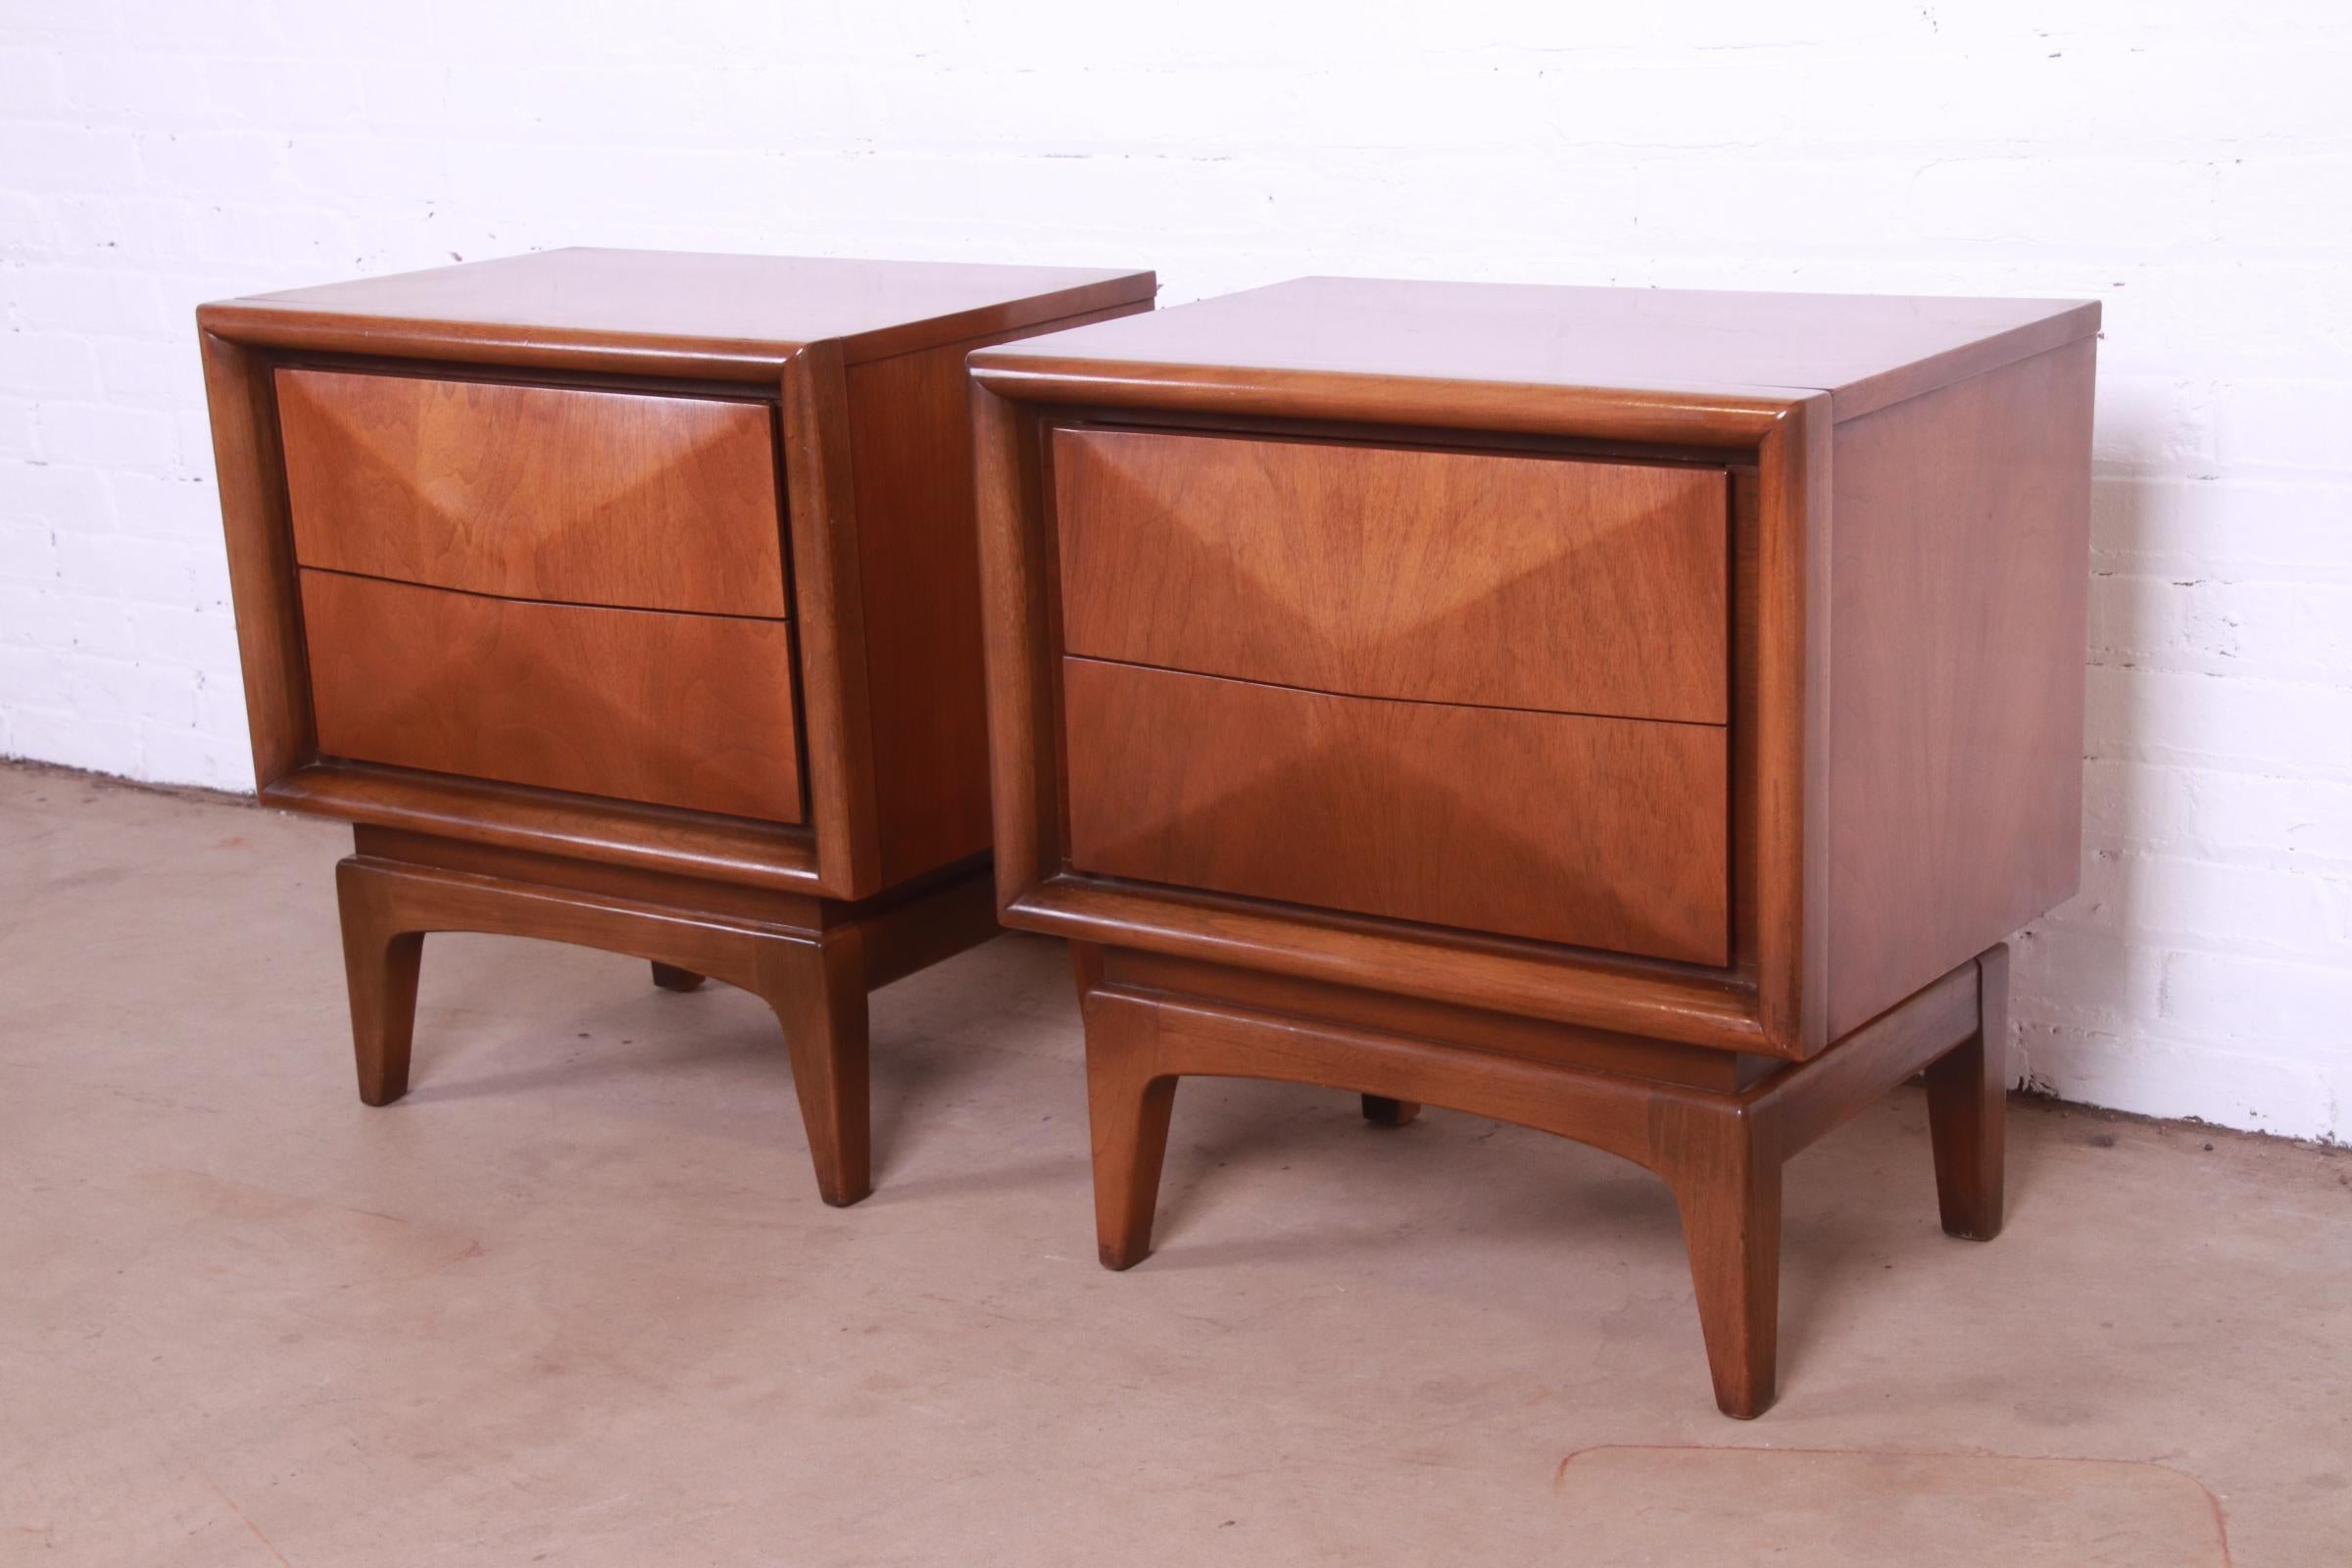 Mid-20th Century Mid-Century Modern Sculpted Walnut Diamond Front Nightstands by United, Pair